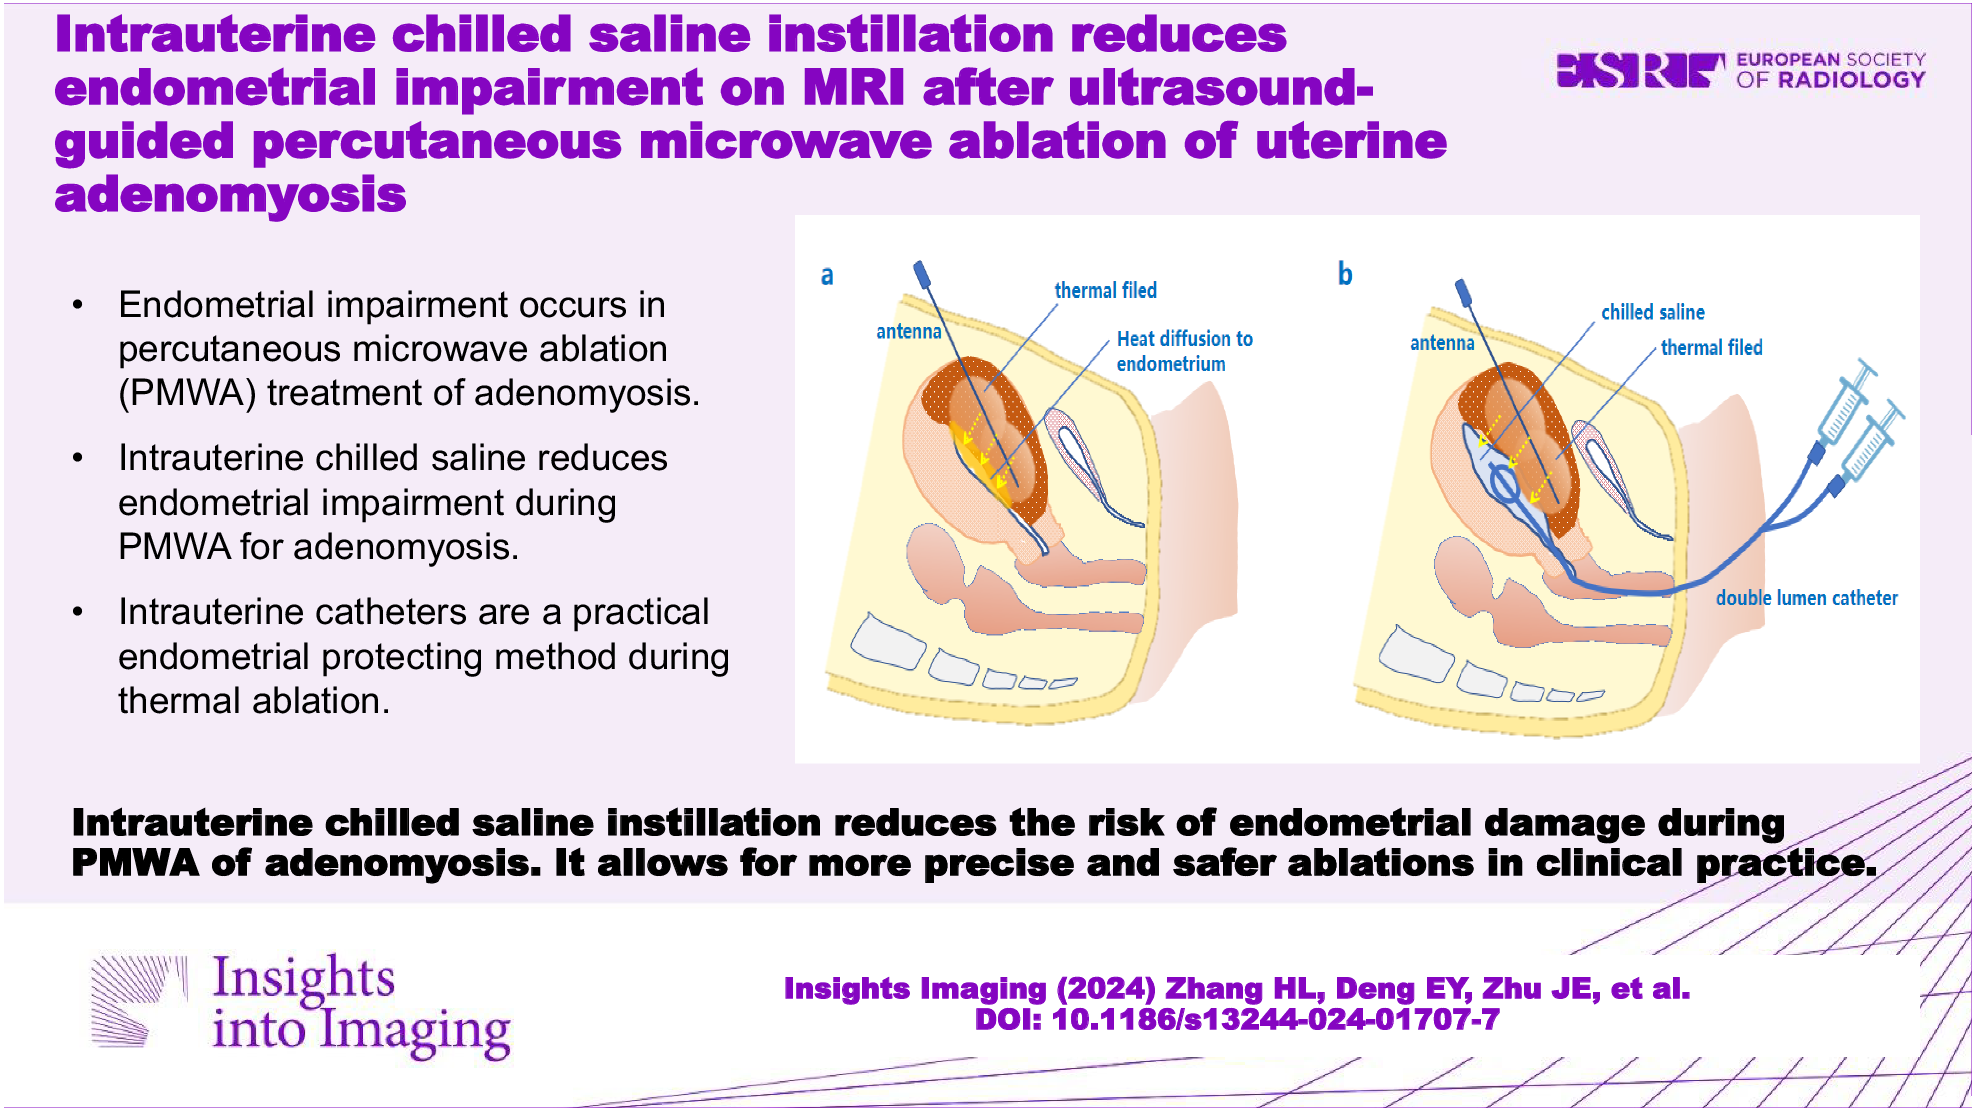 Intrauterine chilled saline instillation reduces endometrial impairment on MRI after ultrasound-guided percutaneous microwave ablation of uterine adenomyosis